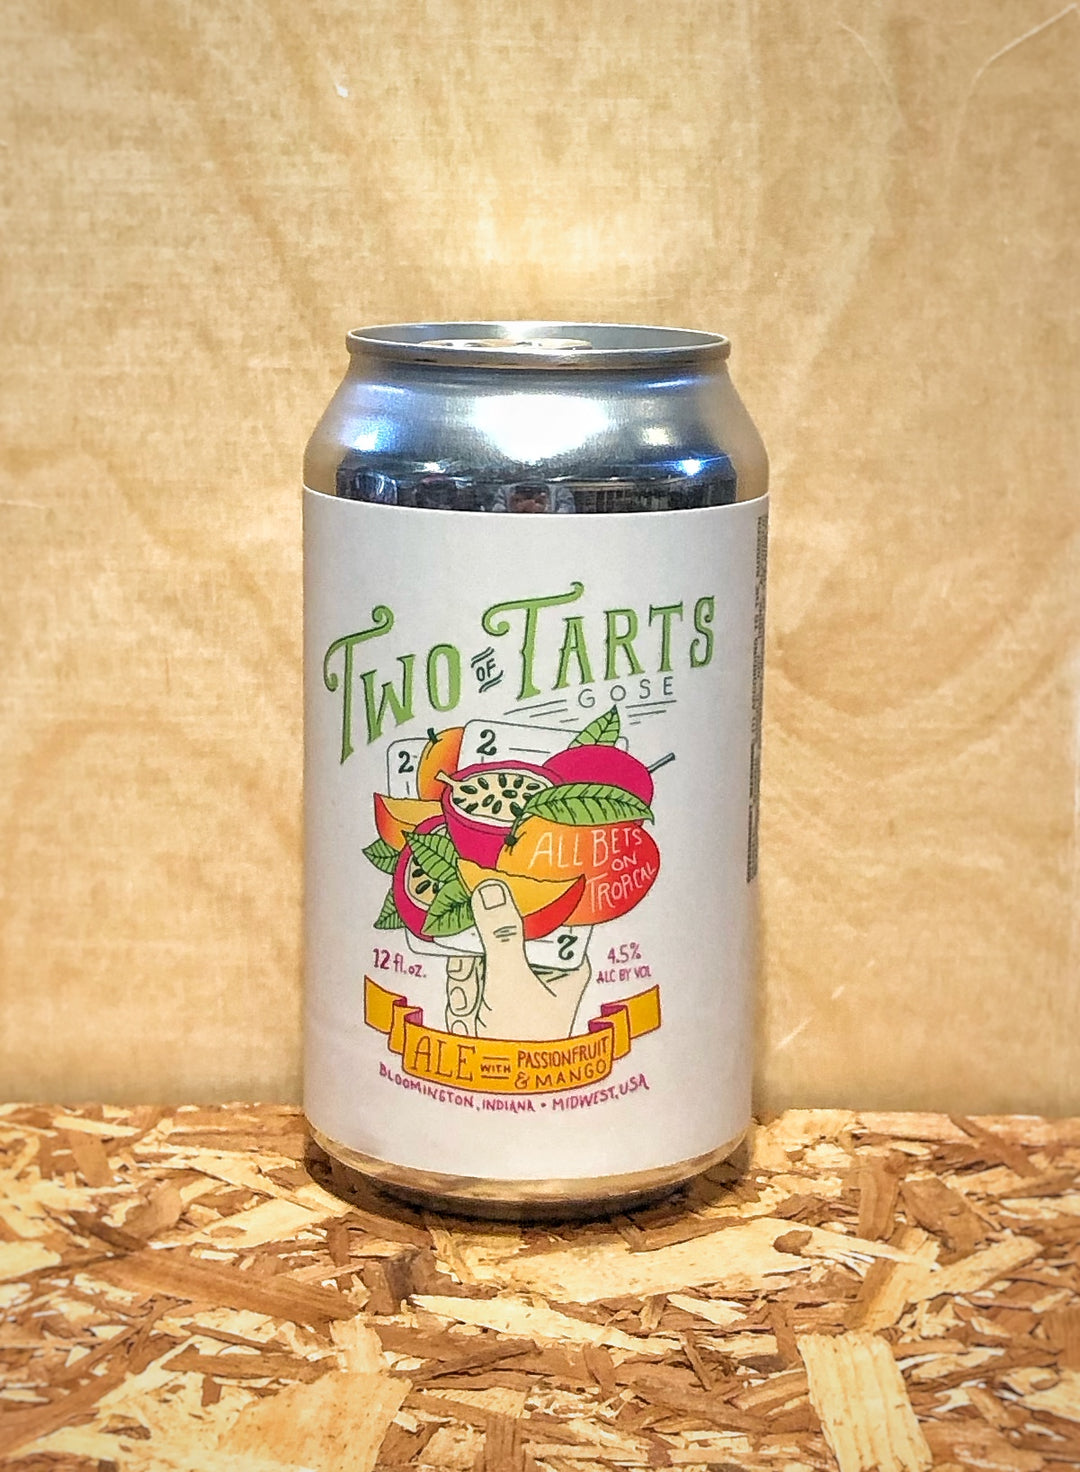 Upland Brewing 'Two of Tarts' Tart Ale with Passionfruit & Mango (Bloomington, IN)